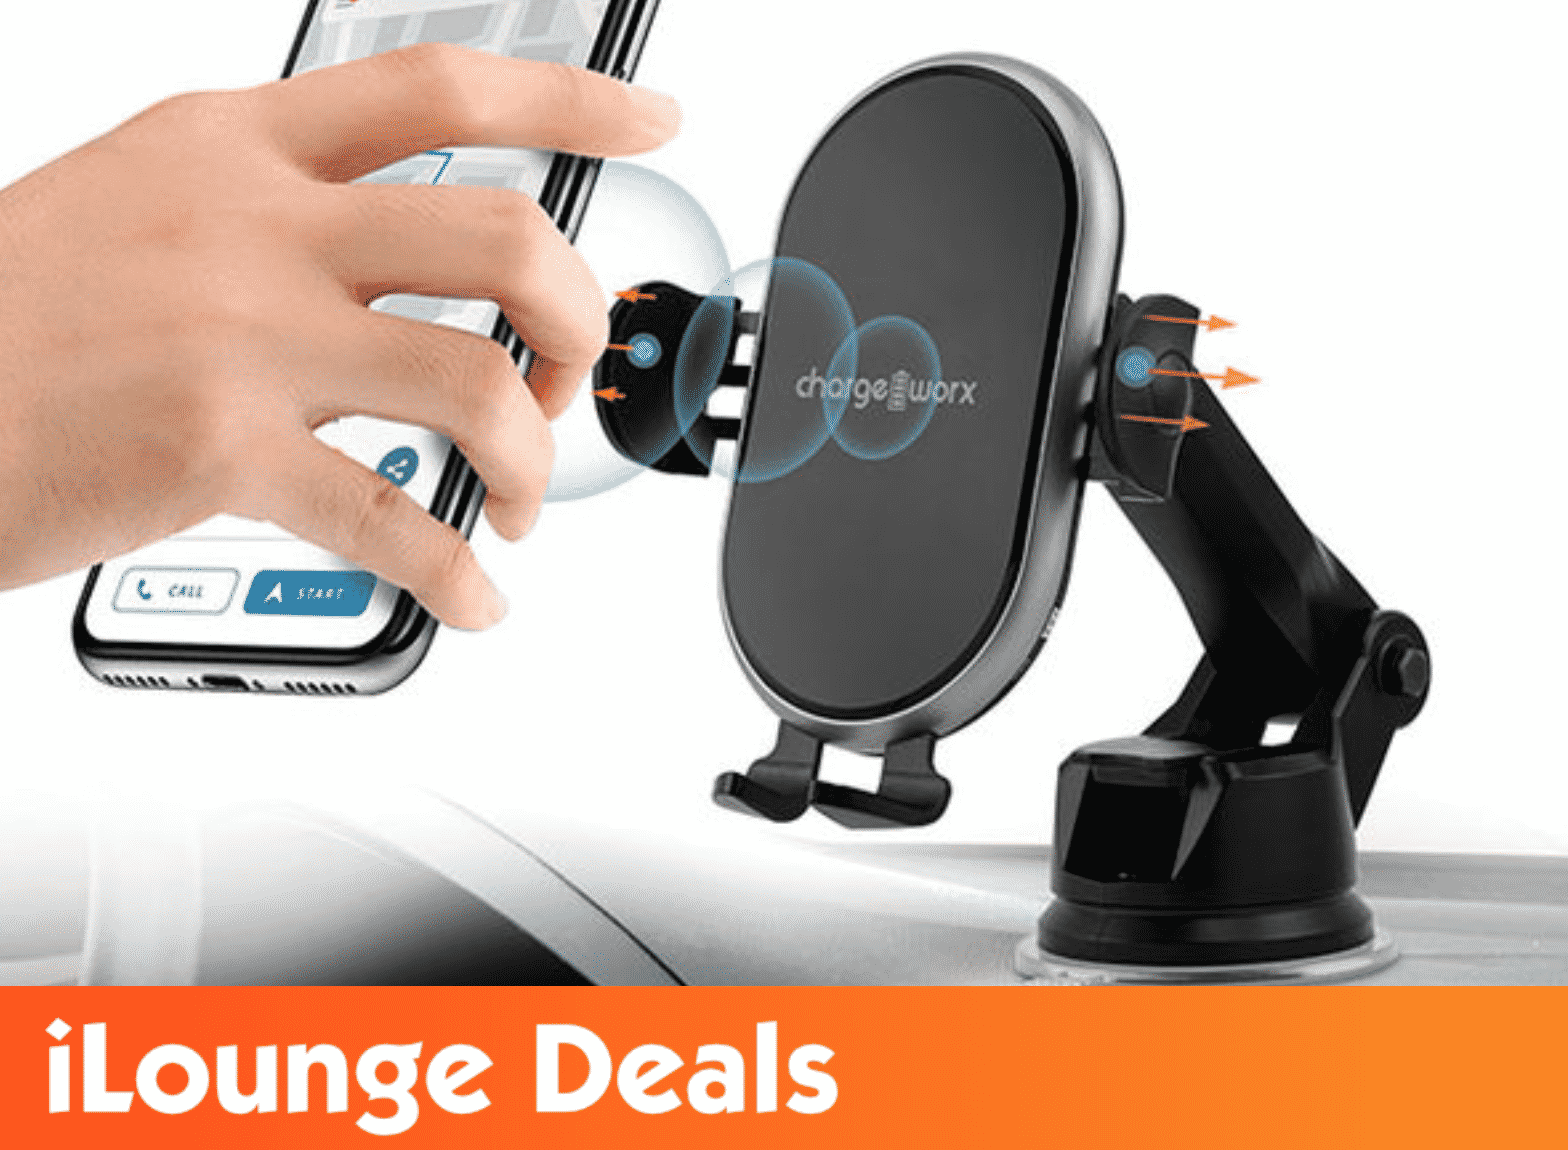 Chargeworx Motion-Activated Wireless Charging Car Mount